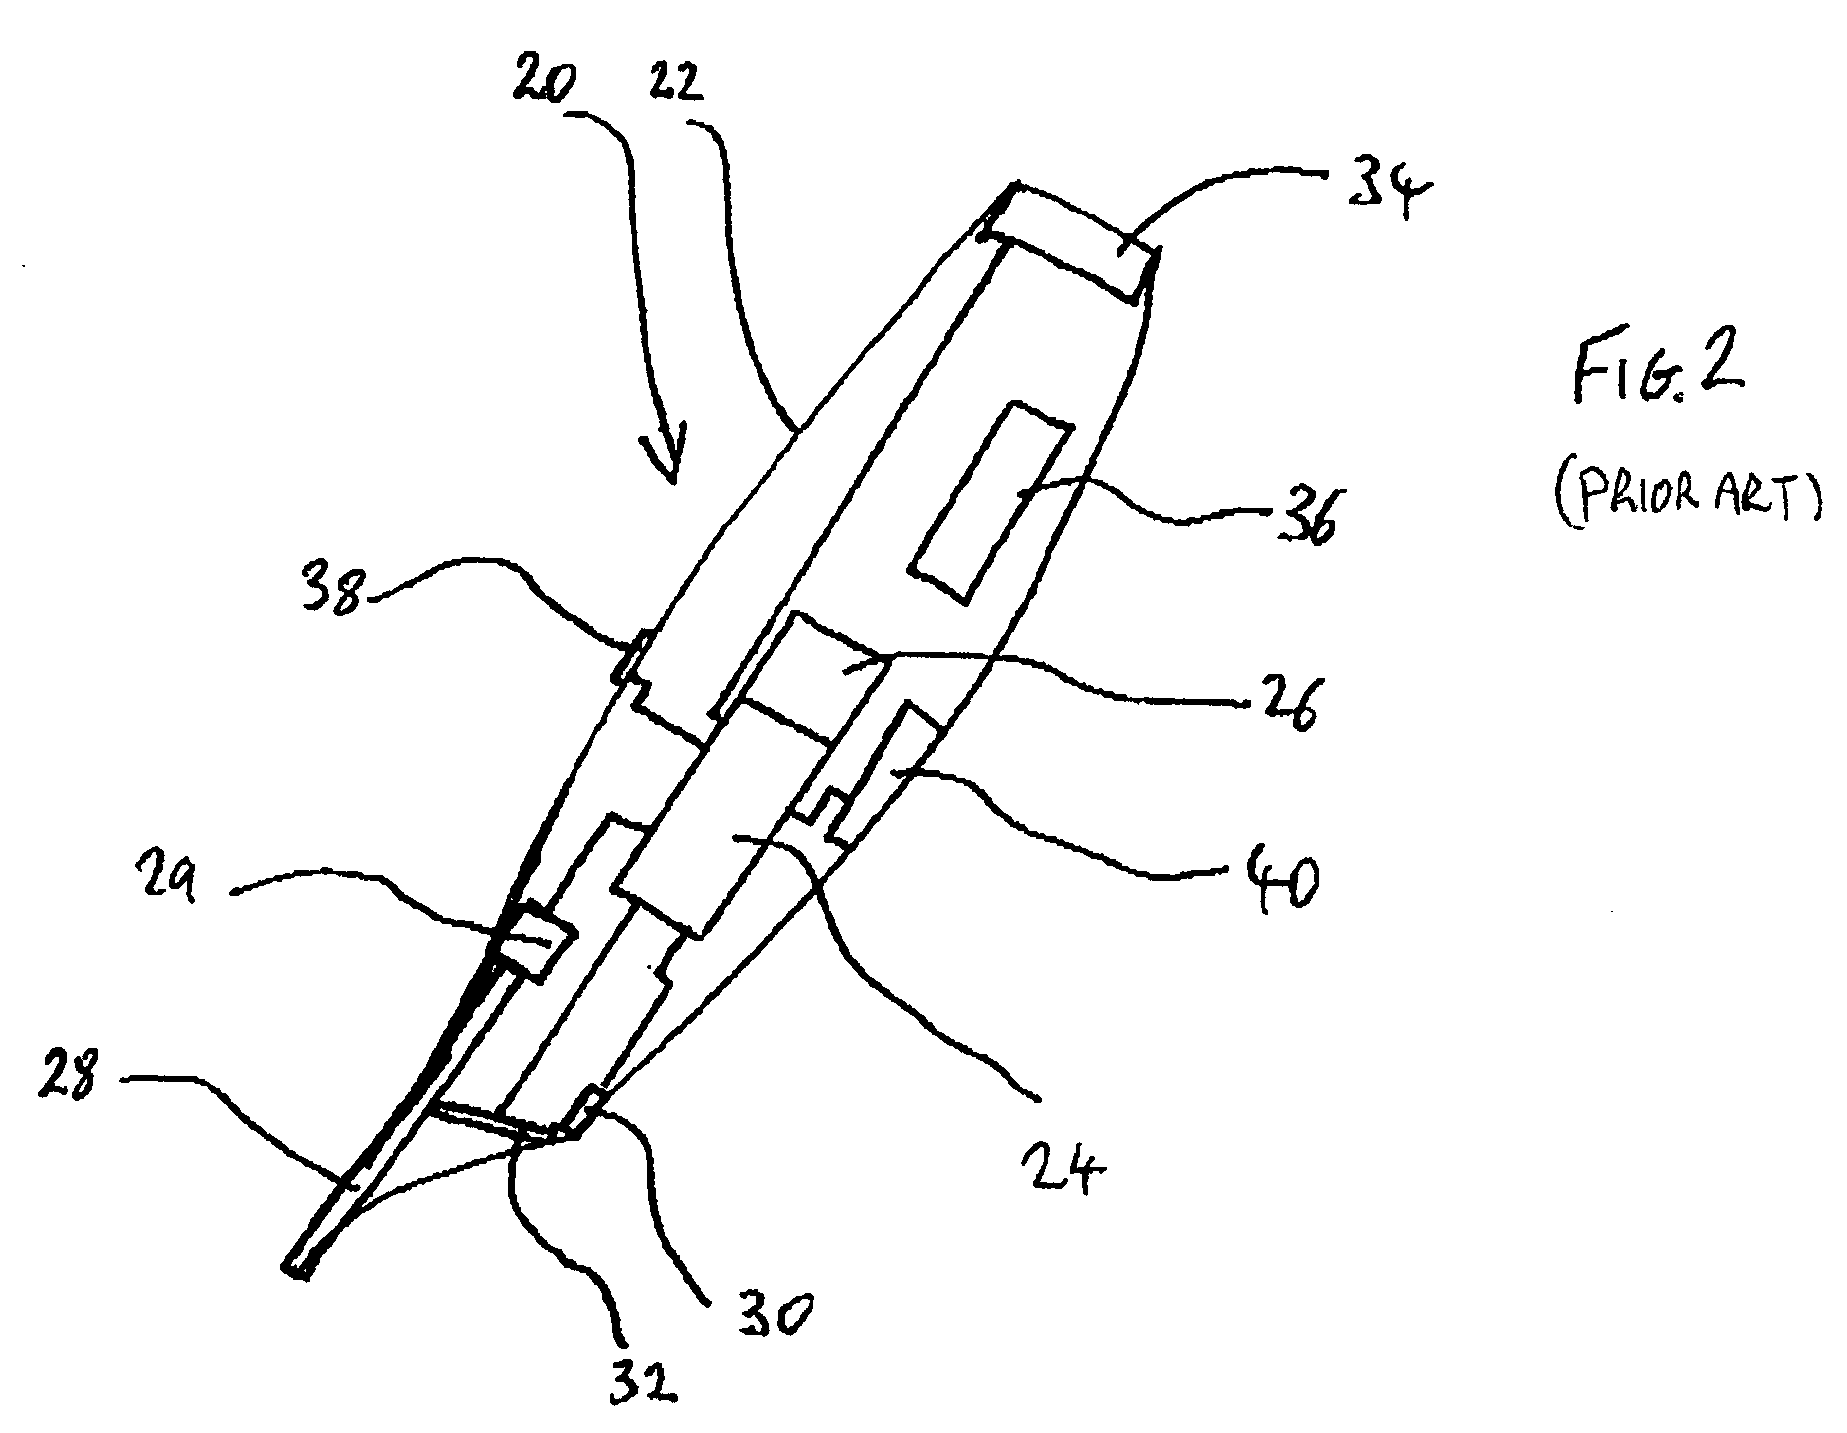 Location patterns and methods and apparatus for generating such patterns